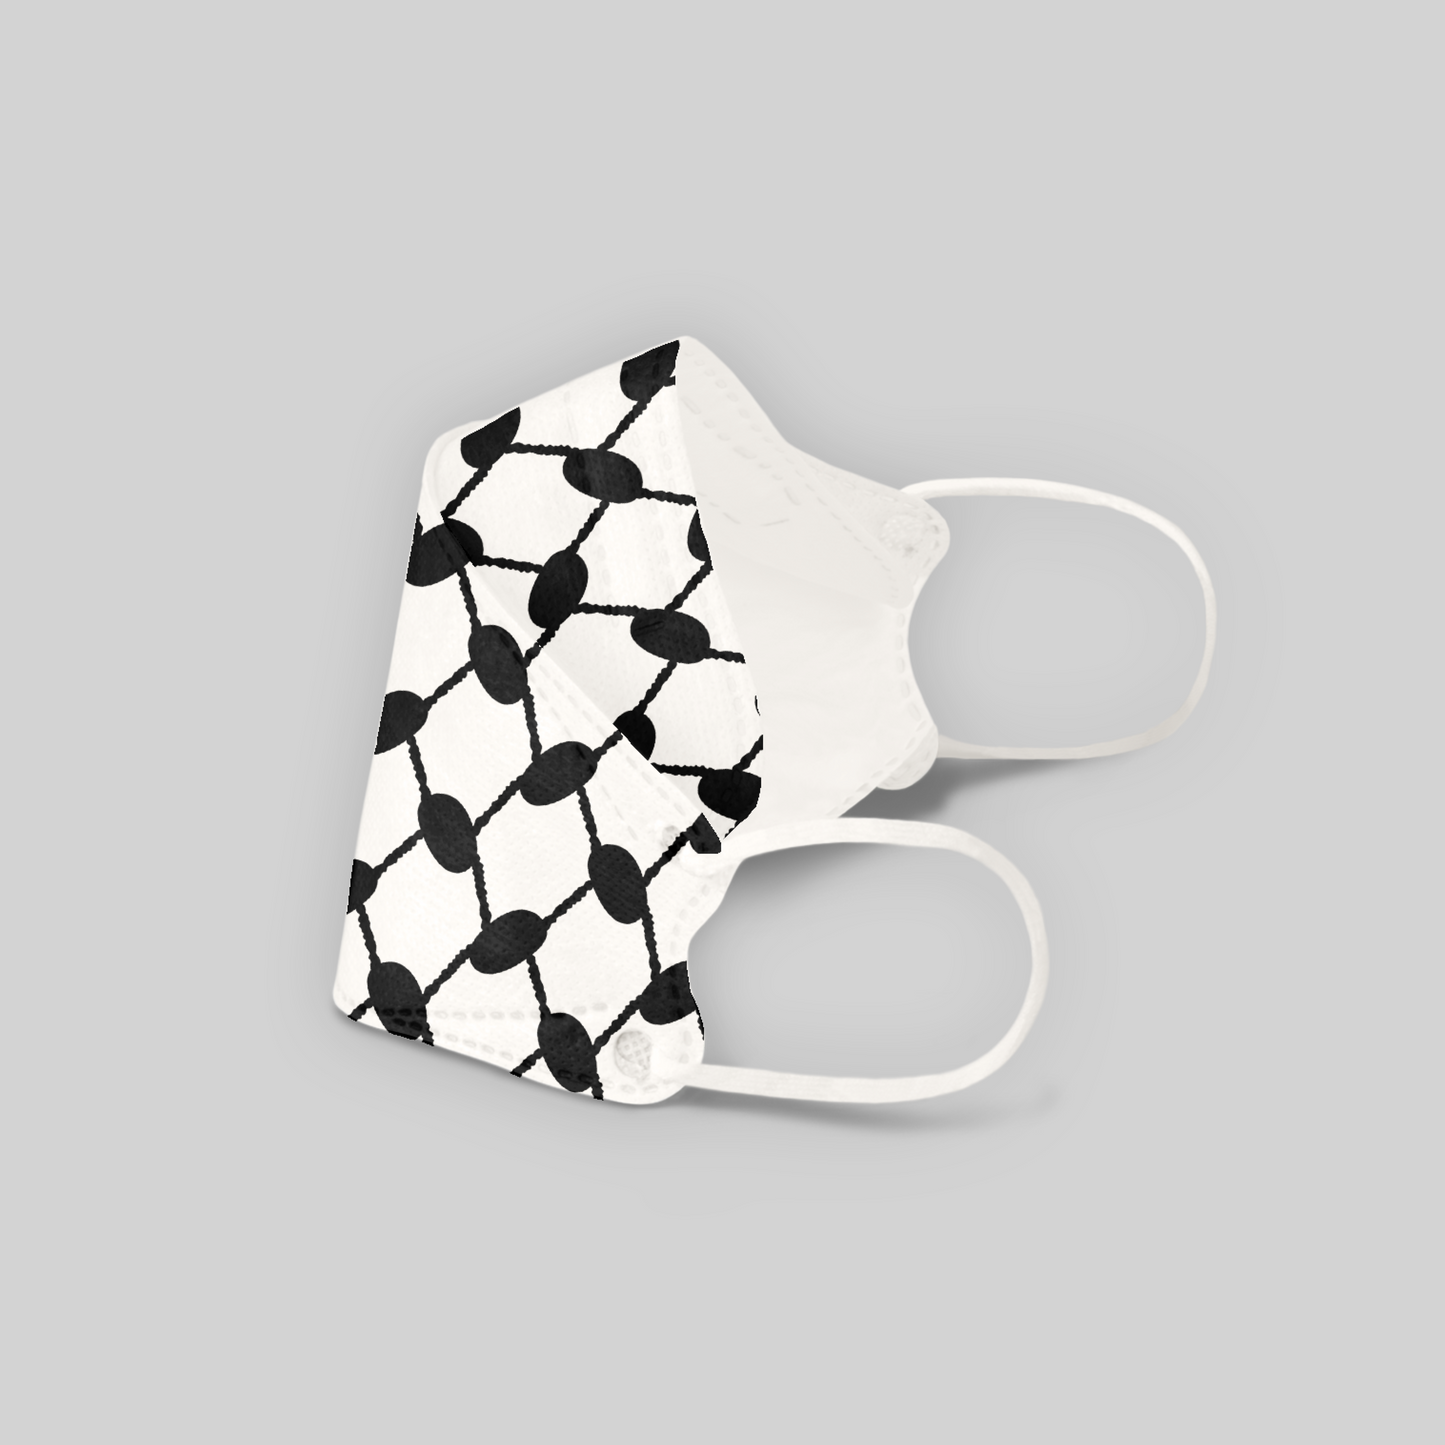 Recyclable Adult Keffiyeh 3D Face Masks with KN95 Protection KF94 Style (NCM SAMPLE)